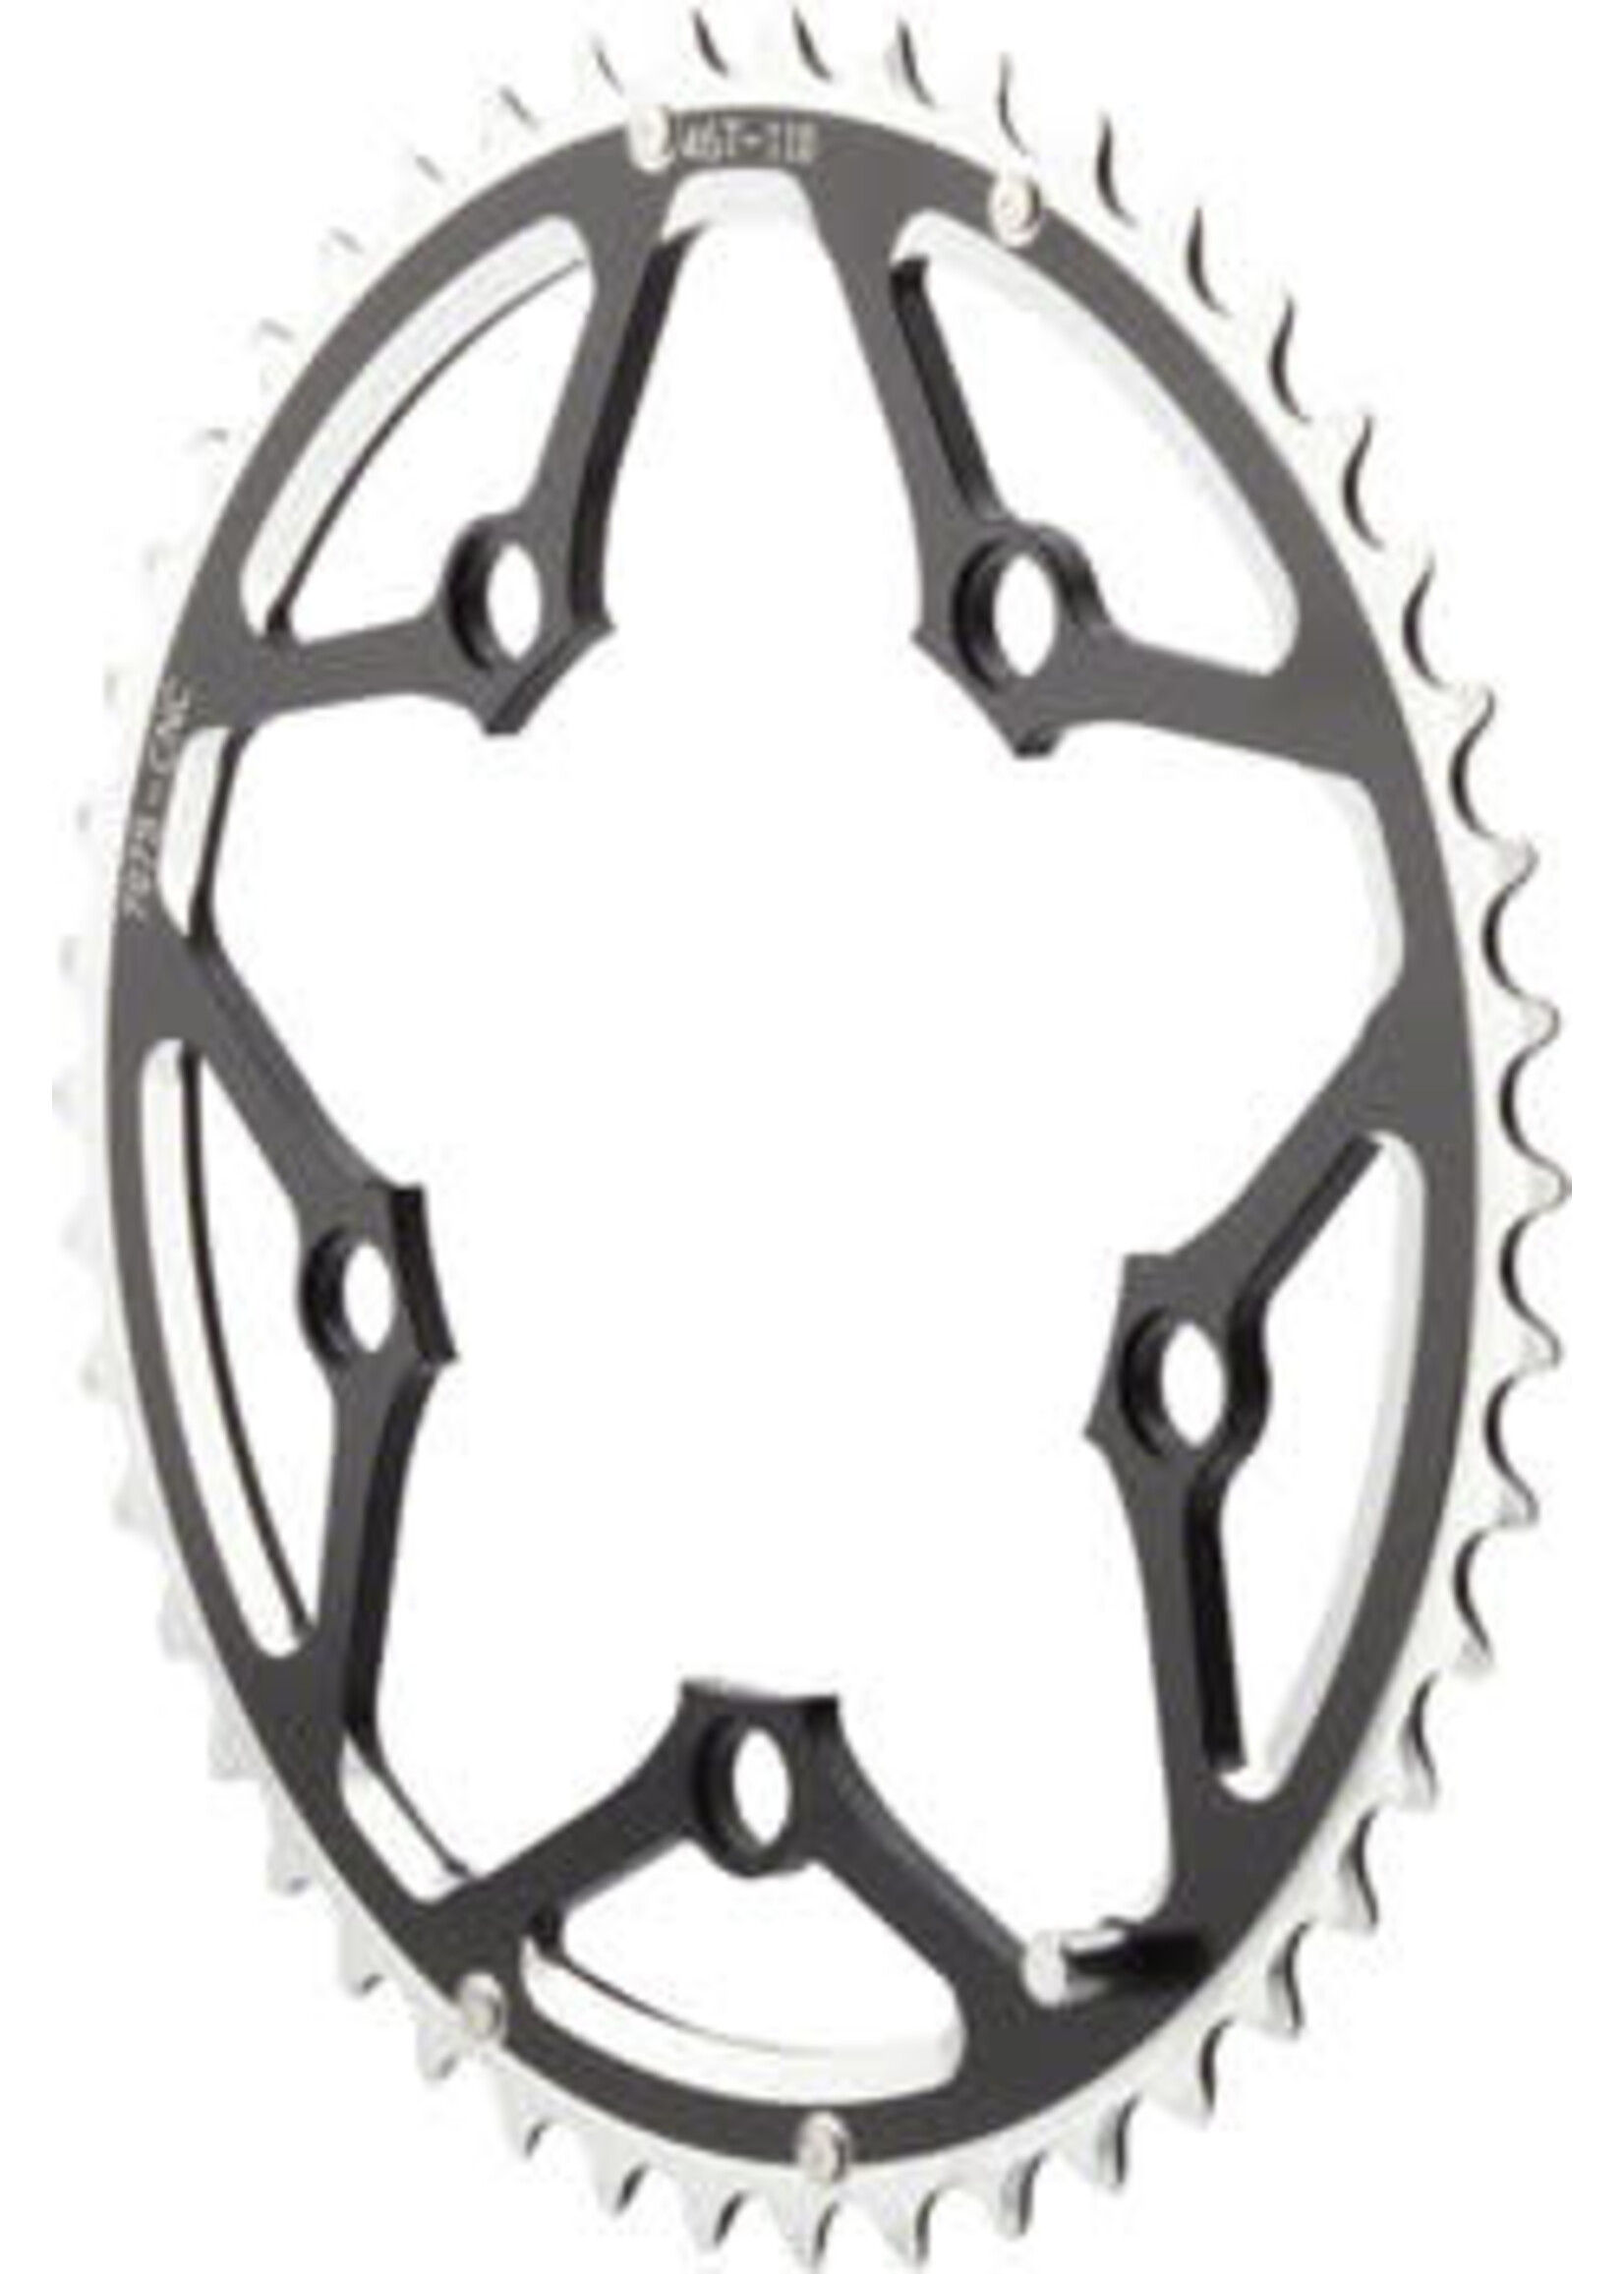 Dimension Dimension Multi Speed Chainring - 48T, 110mm BCD, Outer, Black